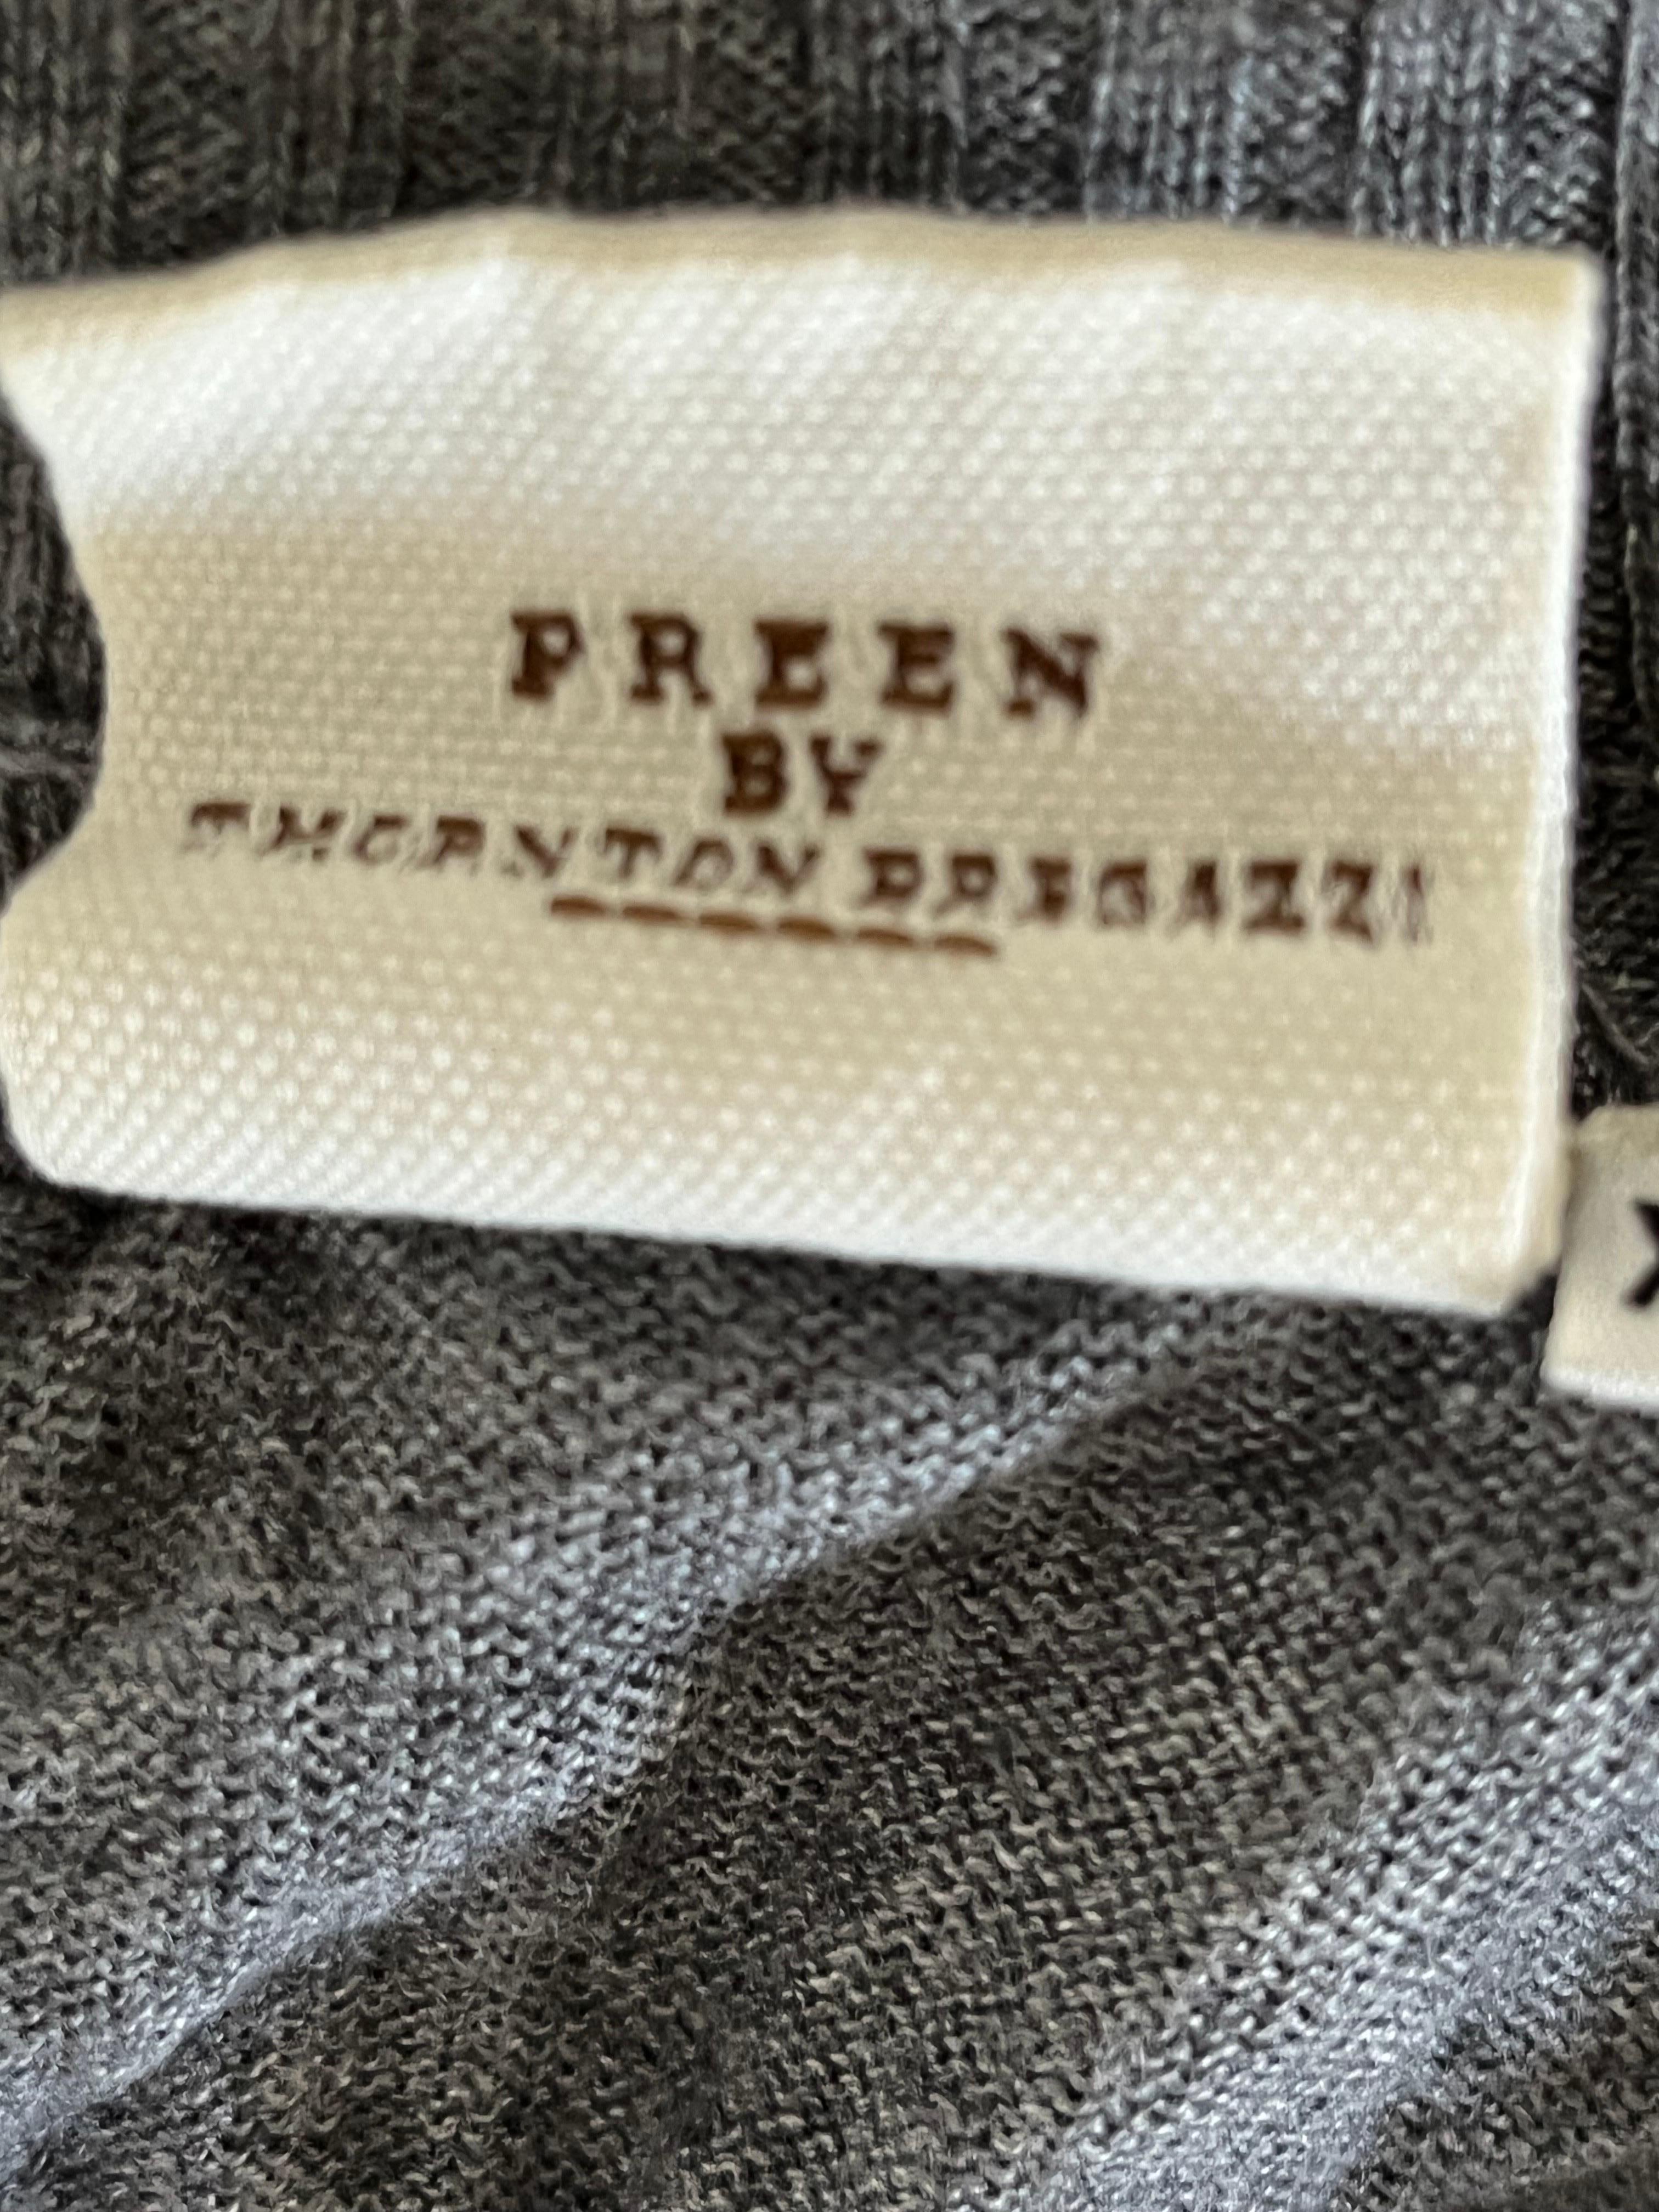 Very cool and unique PREEN by Thronton Bregazzi Y2K Deconstructed Cardigan in light grey.
A great gender neutral item. 
Made from soft and warm fine wool. 